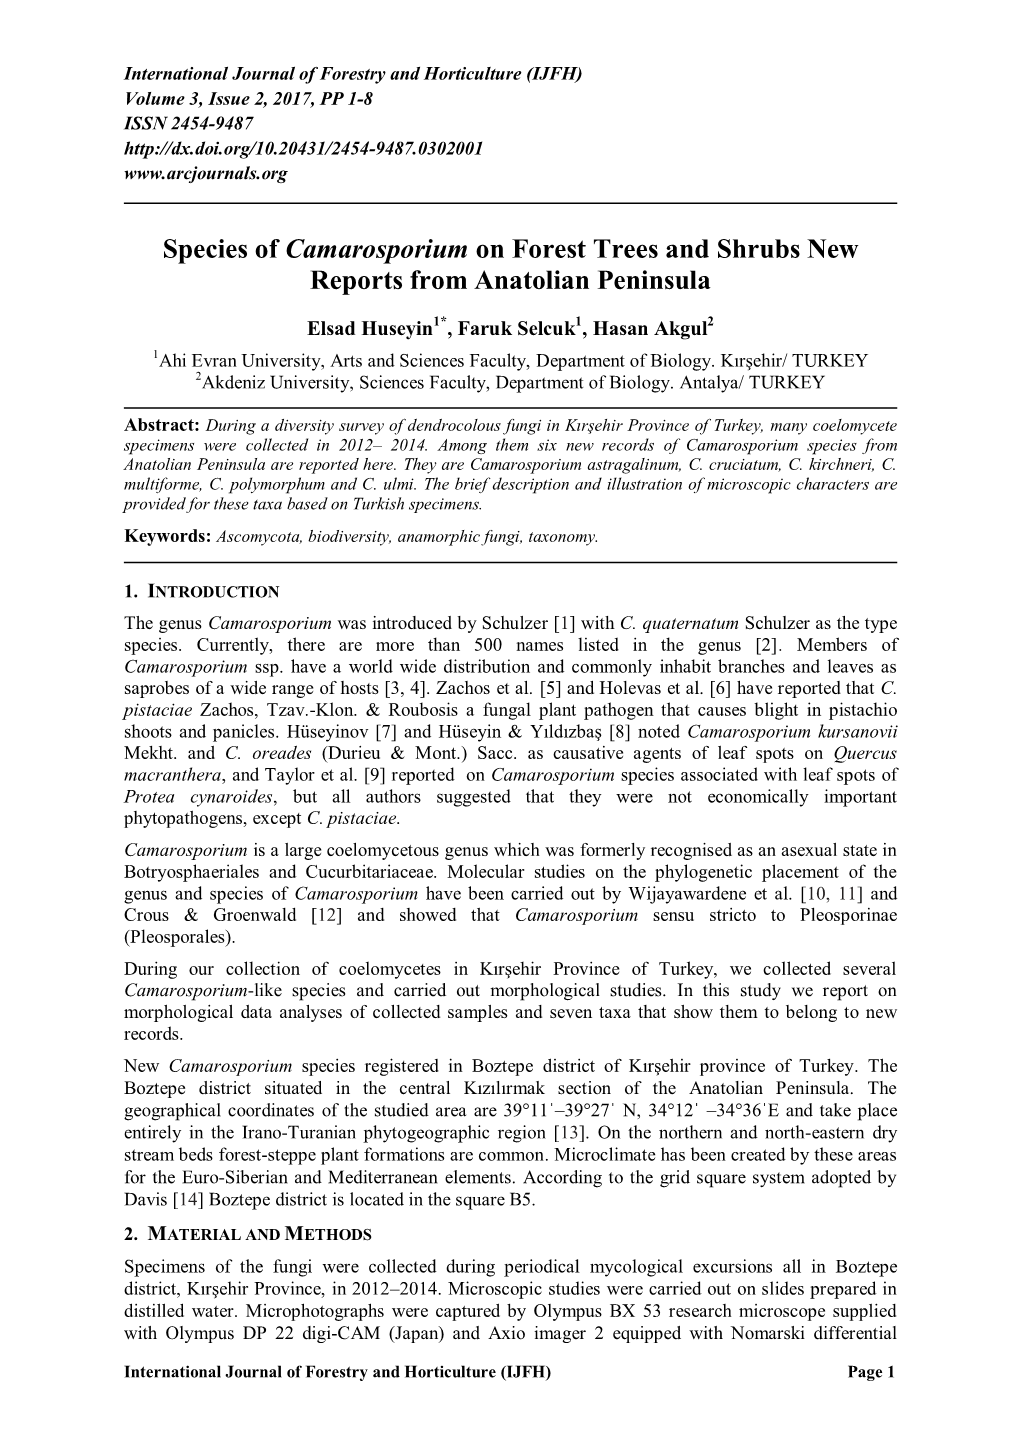 Species of Camarosporium on Forest Trees and Shrubs New Reports from Anatolian Peninsula